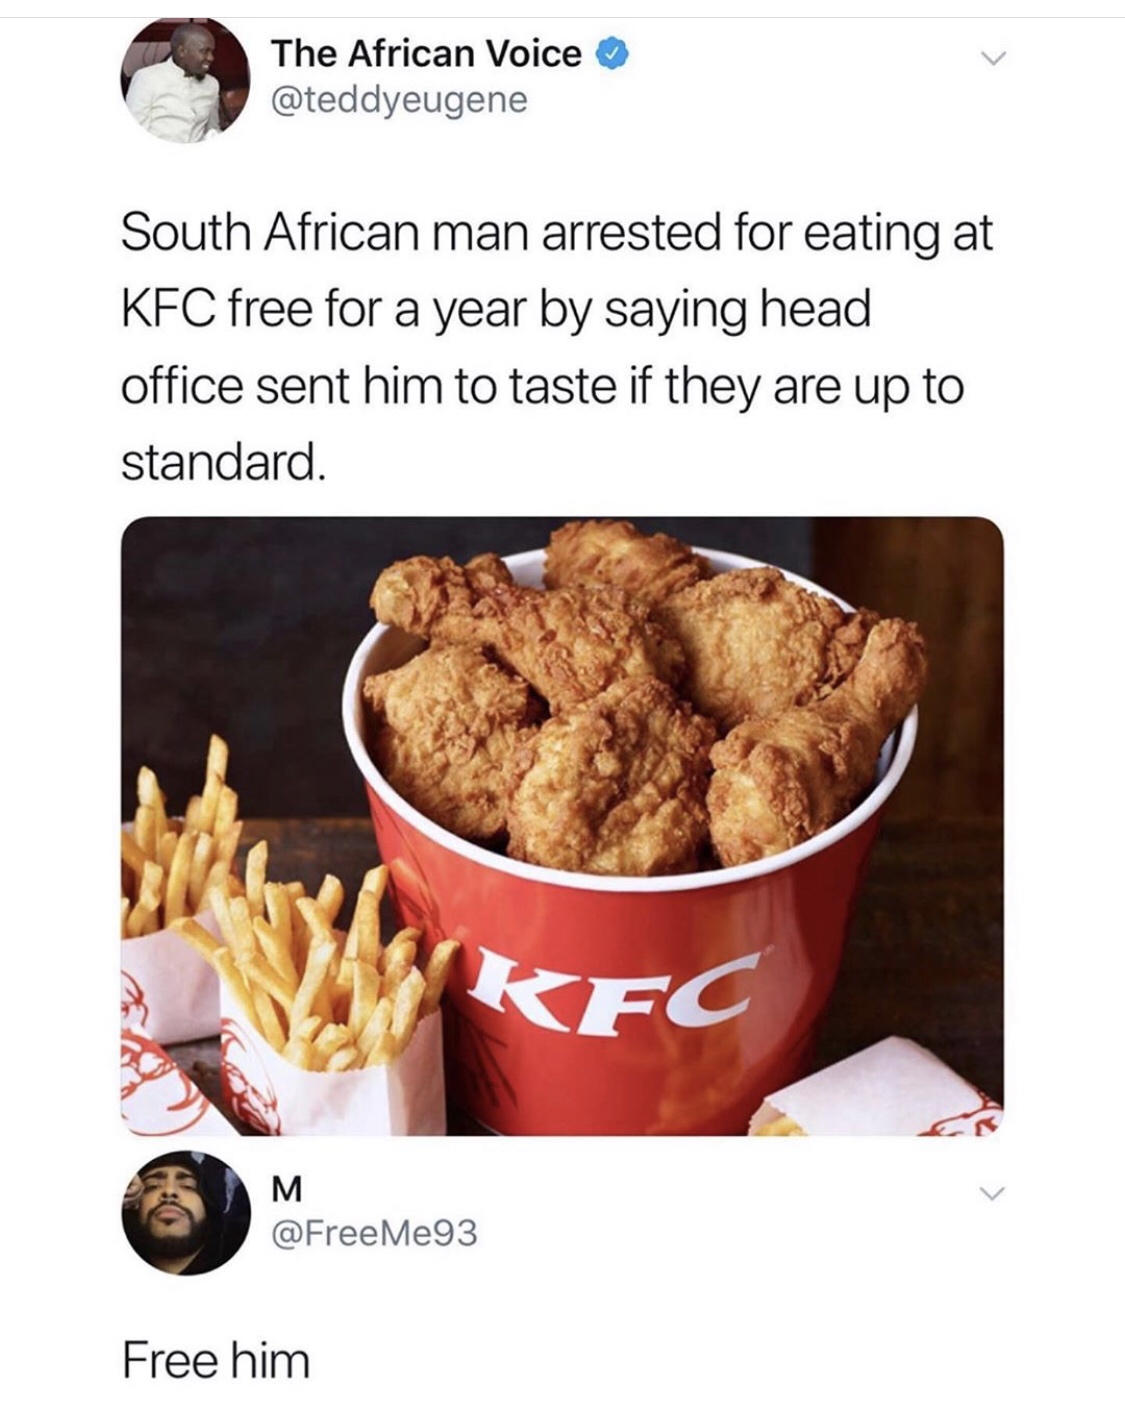 south african funny tweets - The African Voice South African man arrested for eating at Kfc free for a year by saying head office sent him to taste if they are up to standard. M Free him